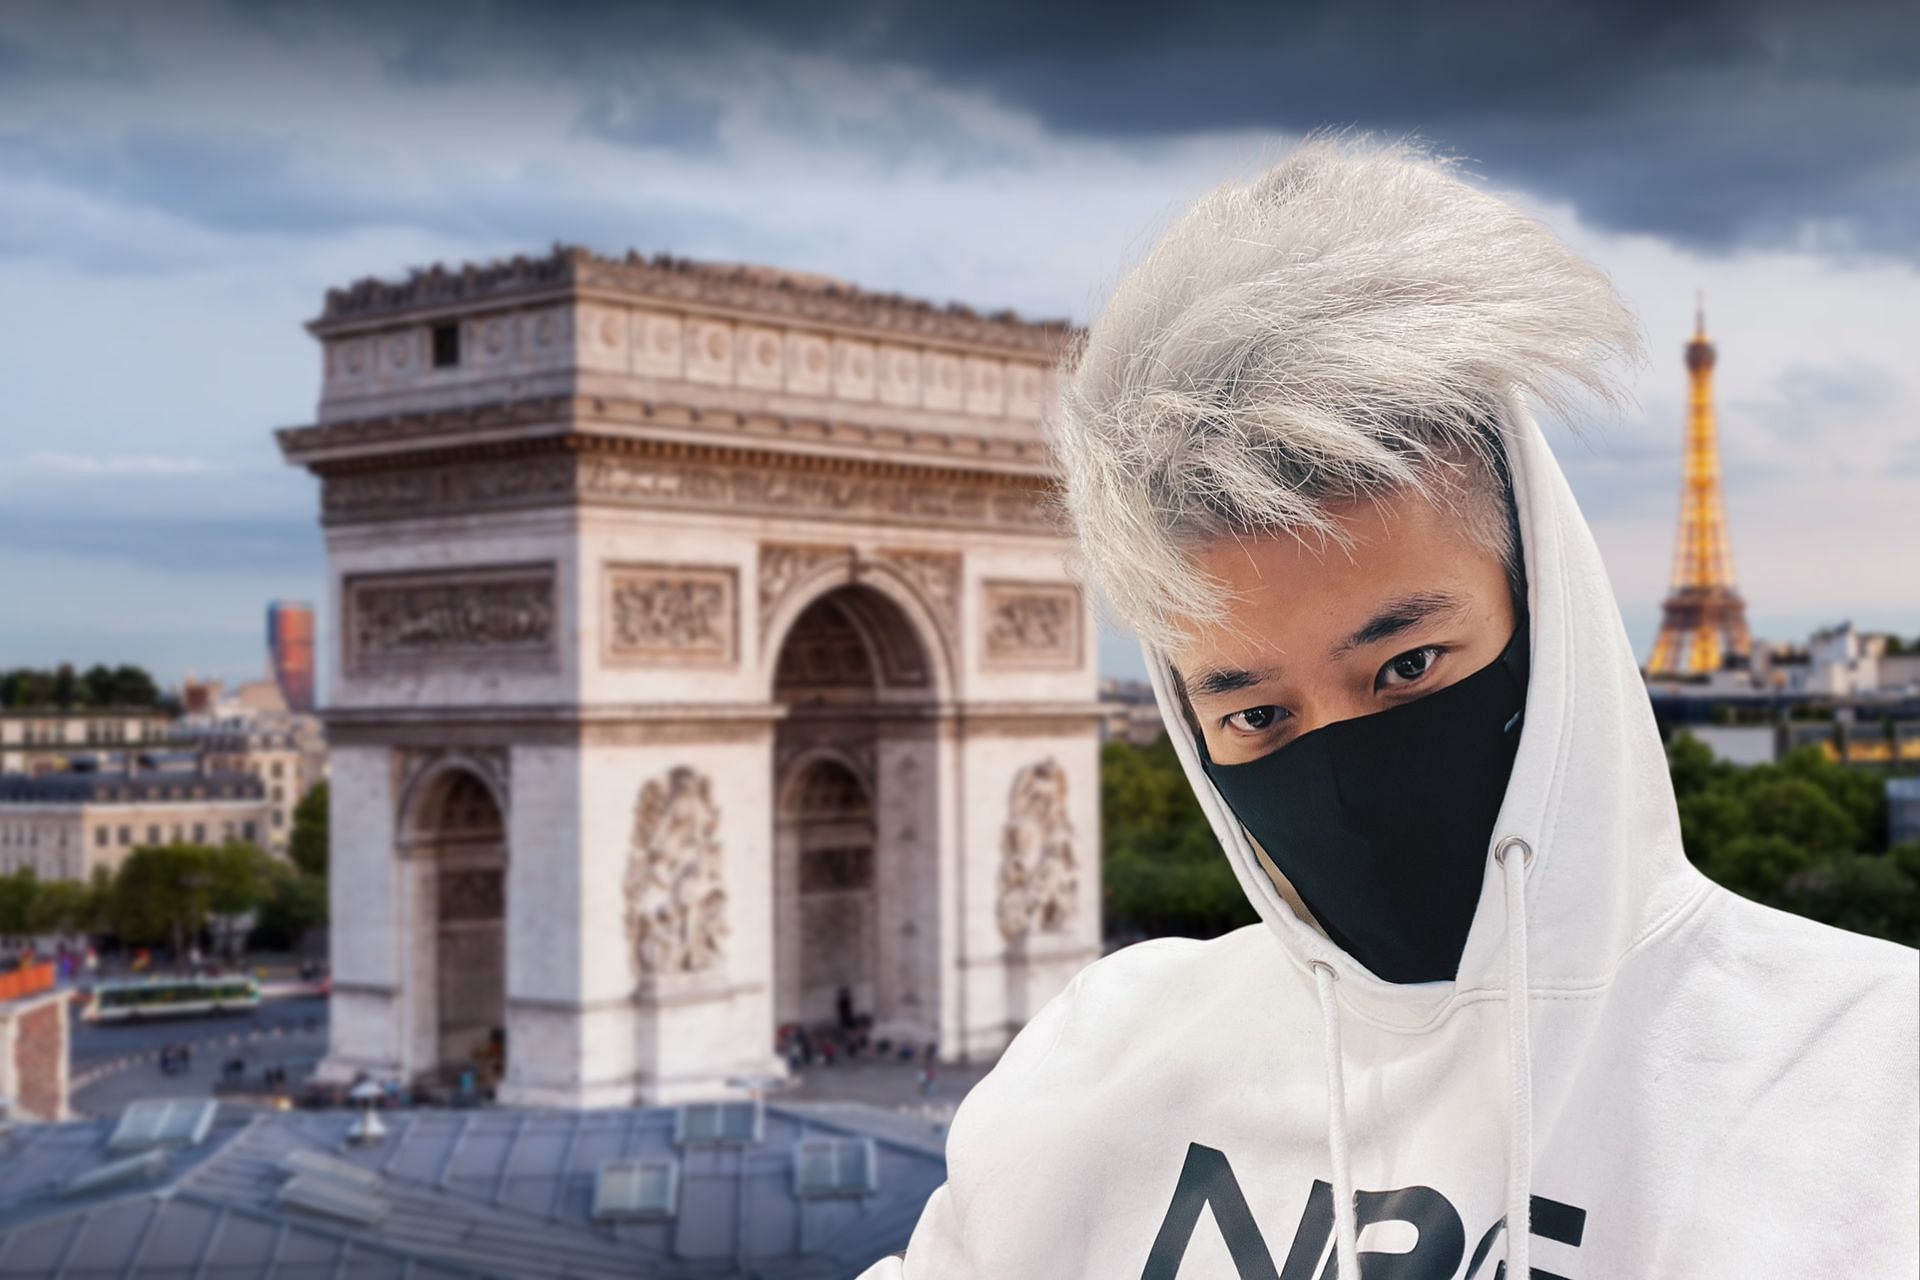 Twitch streamer JoeyKaotic walked down a racist while streaming in France (Image via Sportskeeda)